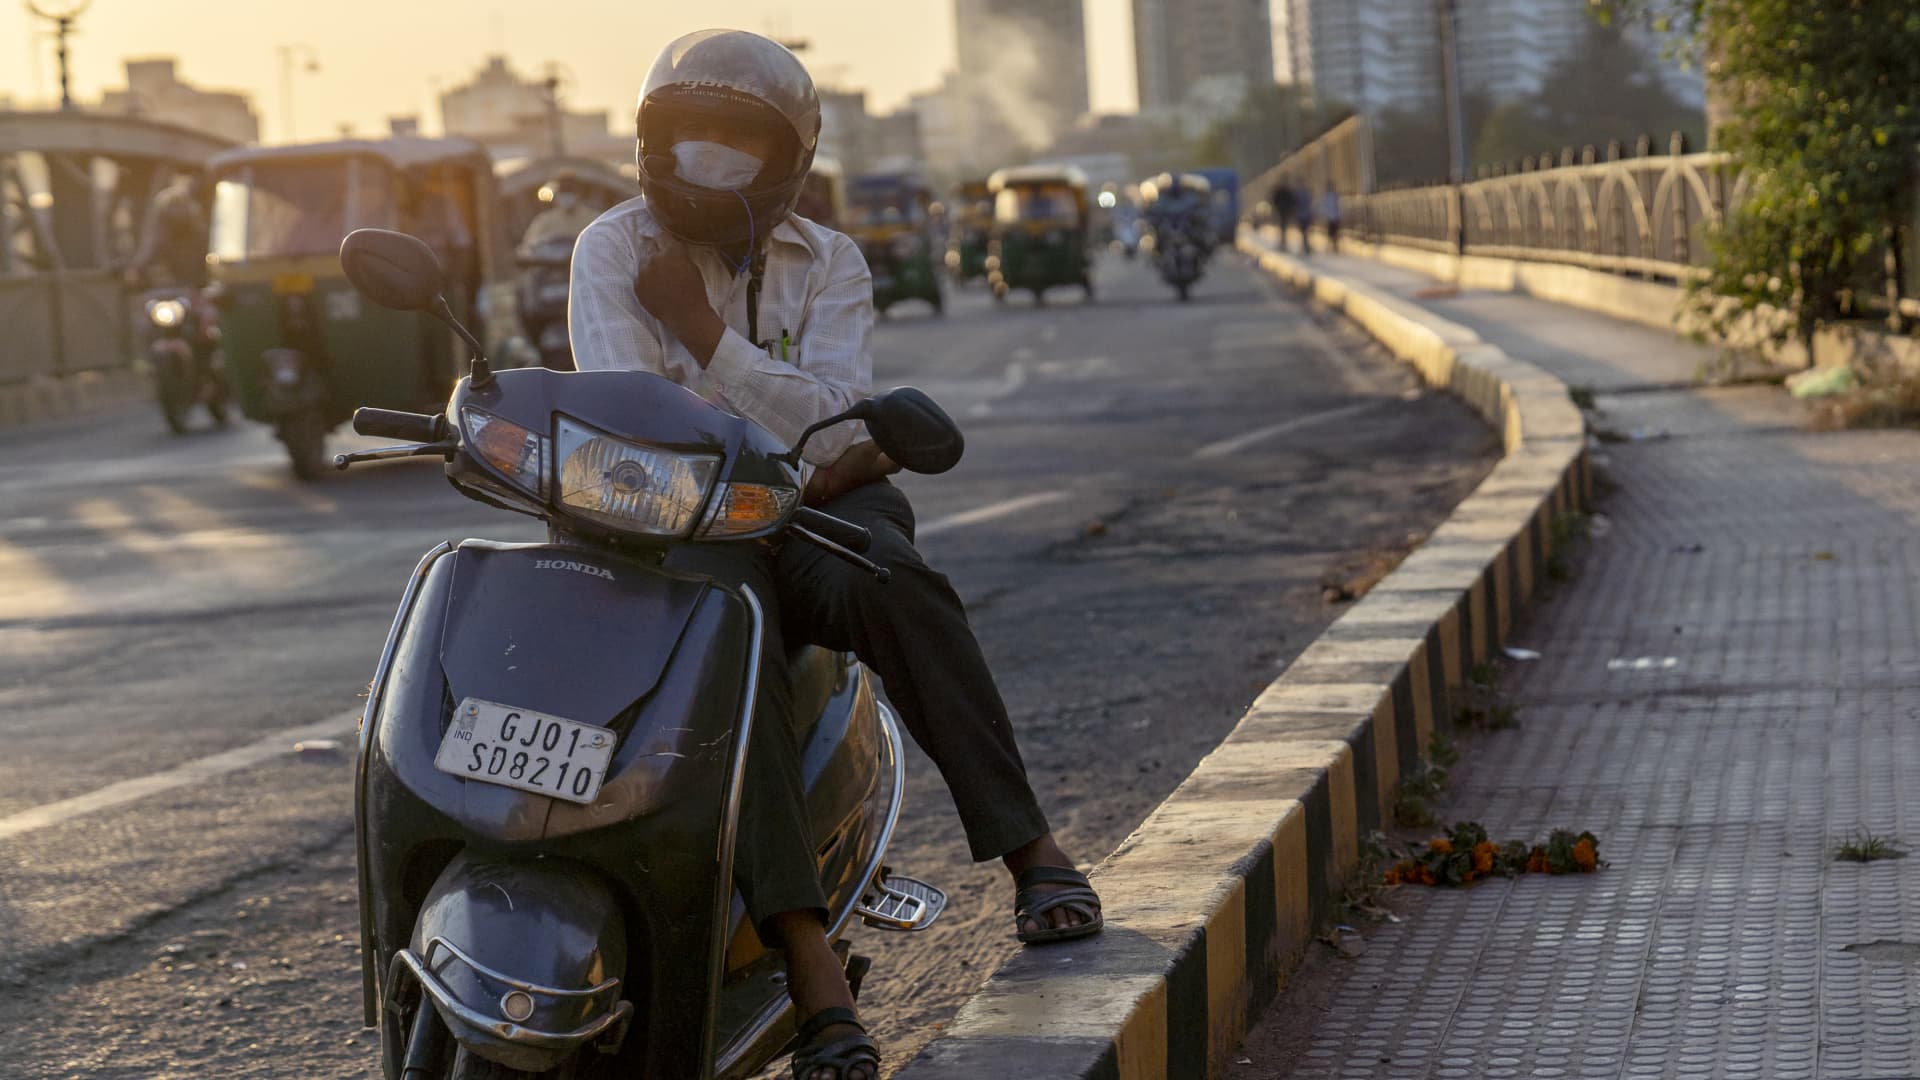 A motorcyclist wears a protective mask while sitting at the side of the road at the Sabarmati Riverfront in Ahmedabad, India, on Thursday, Oct. 22, 2020. Prime Minister Narendra Modi said his government will ensure that all 1.3 billion people nationwide will have access to a Covid-19 vaccine as soon it is ready.